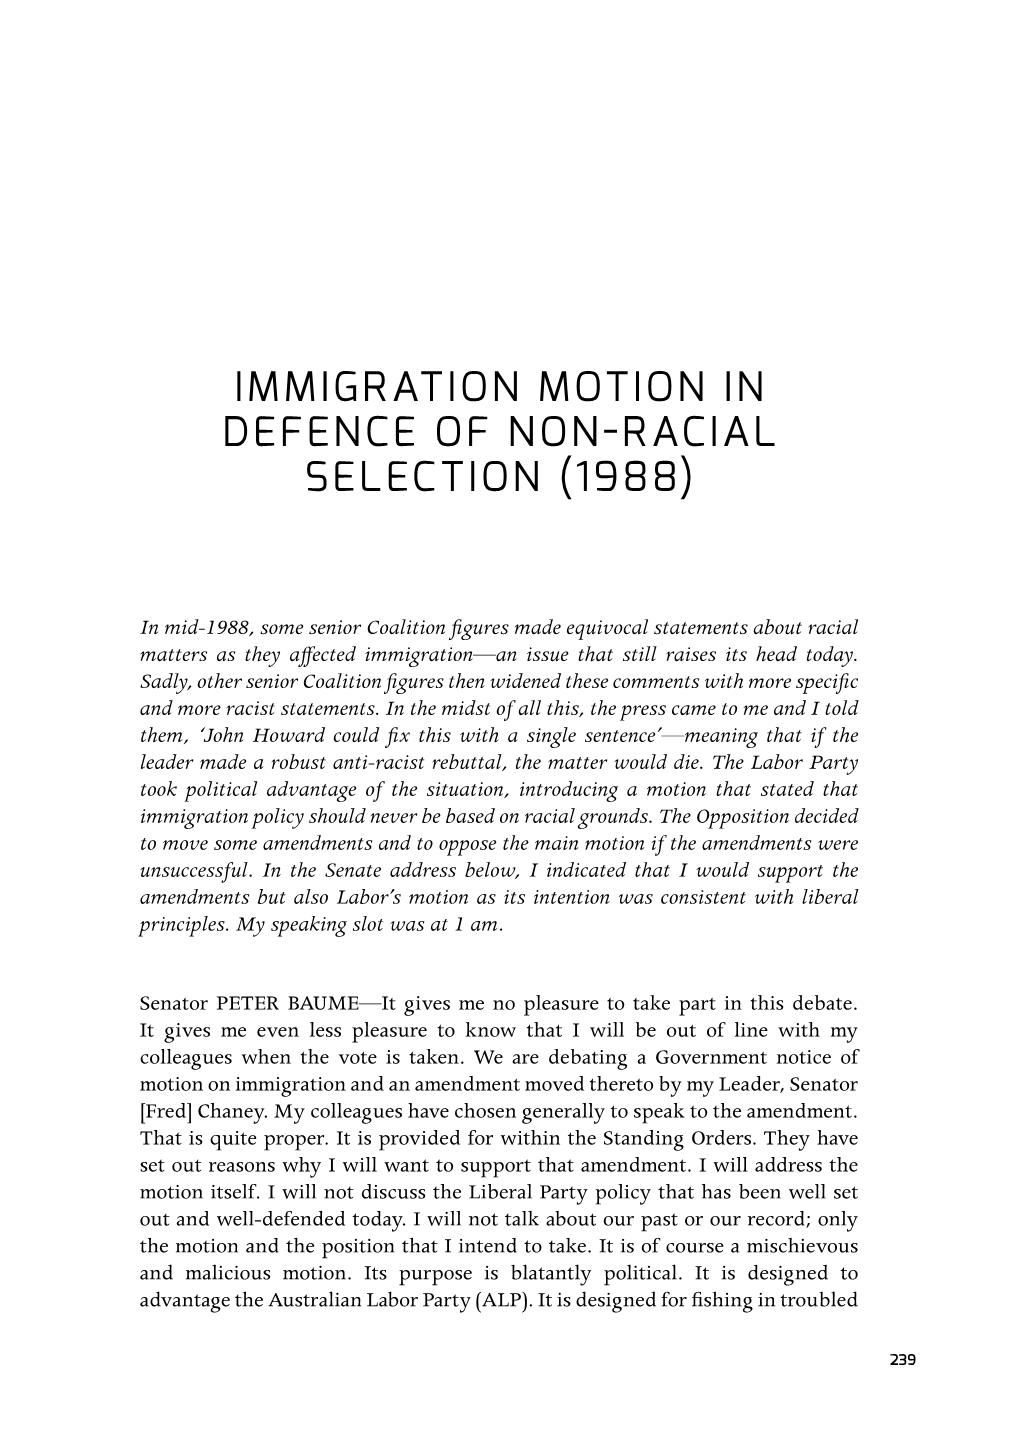 Immigration Motion in Defence of Non-Racial Selection (1988)